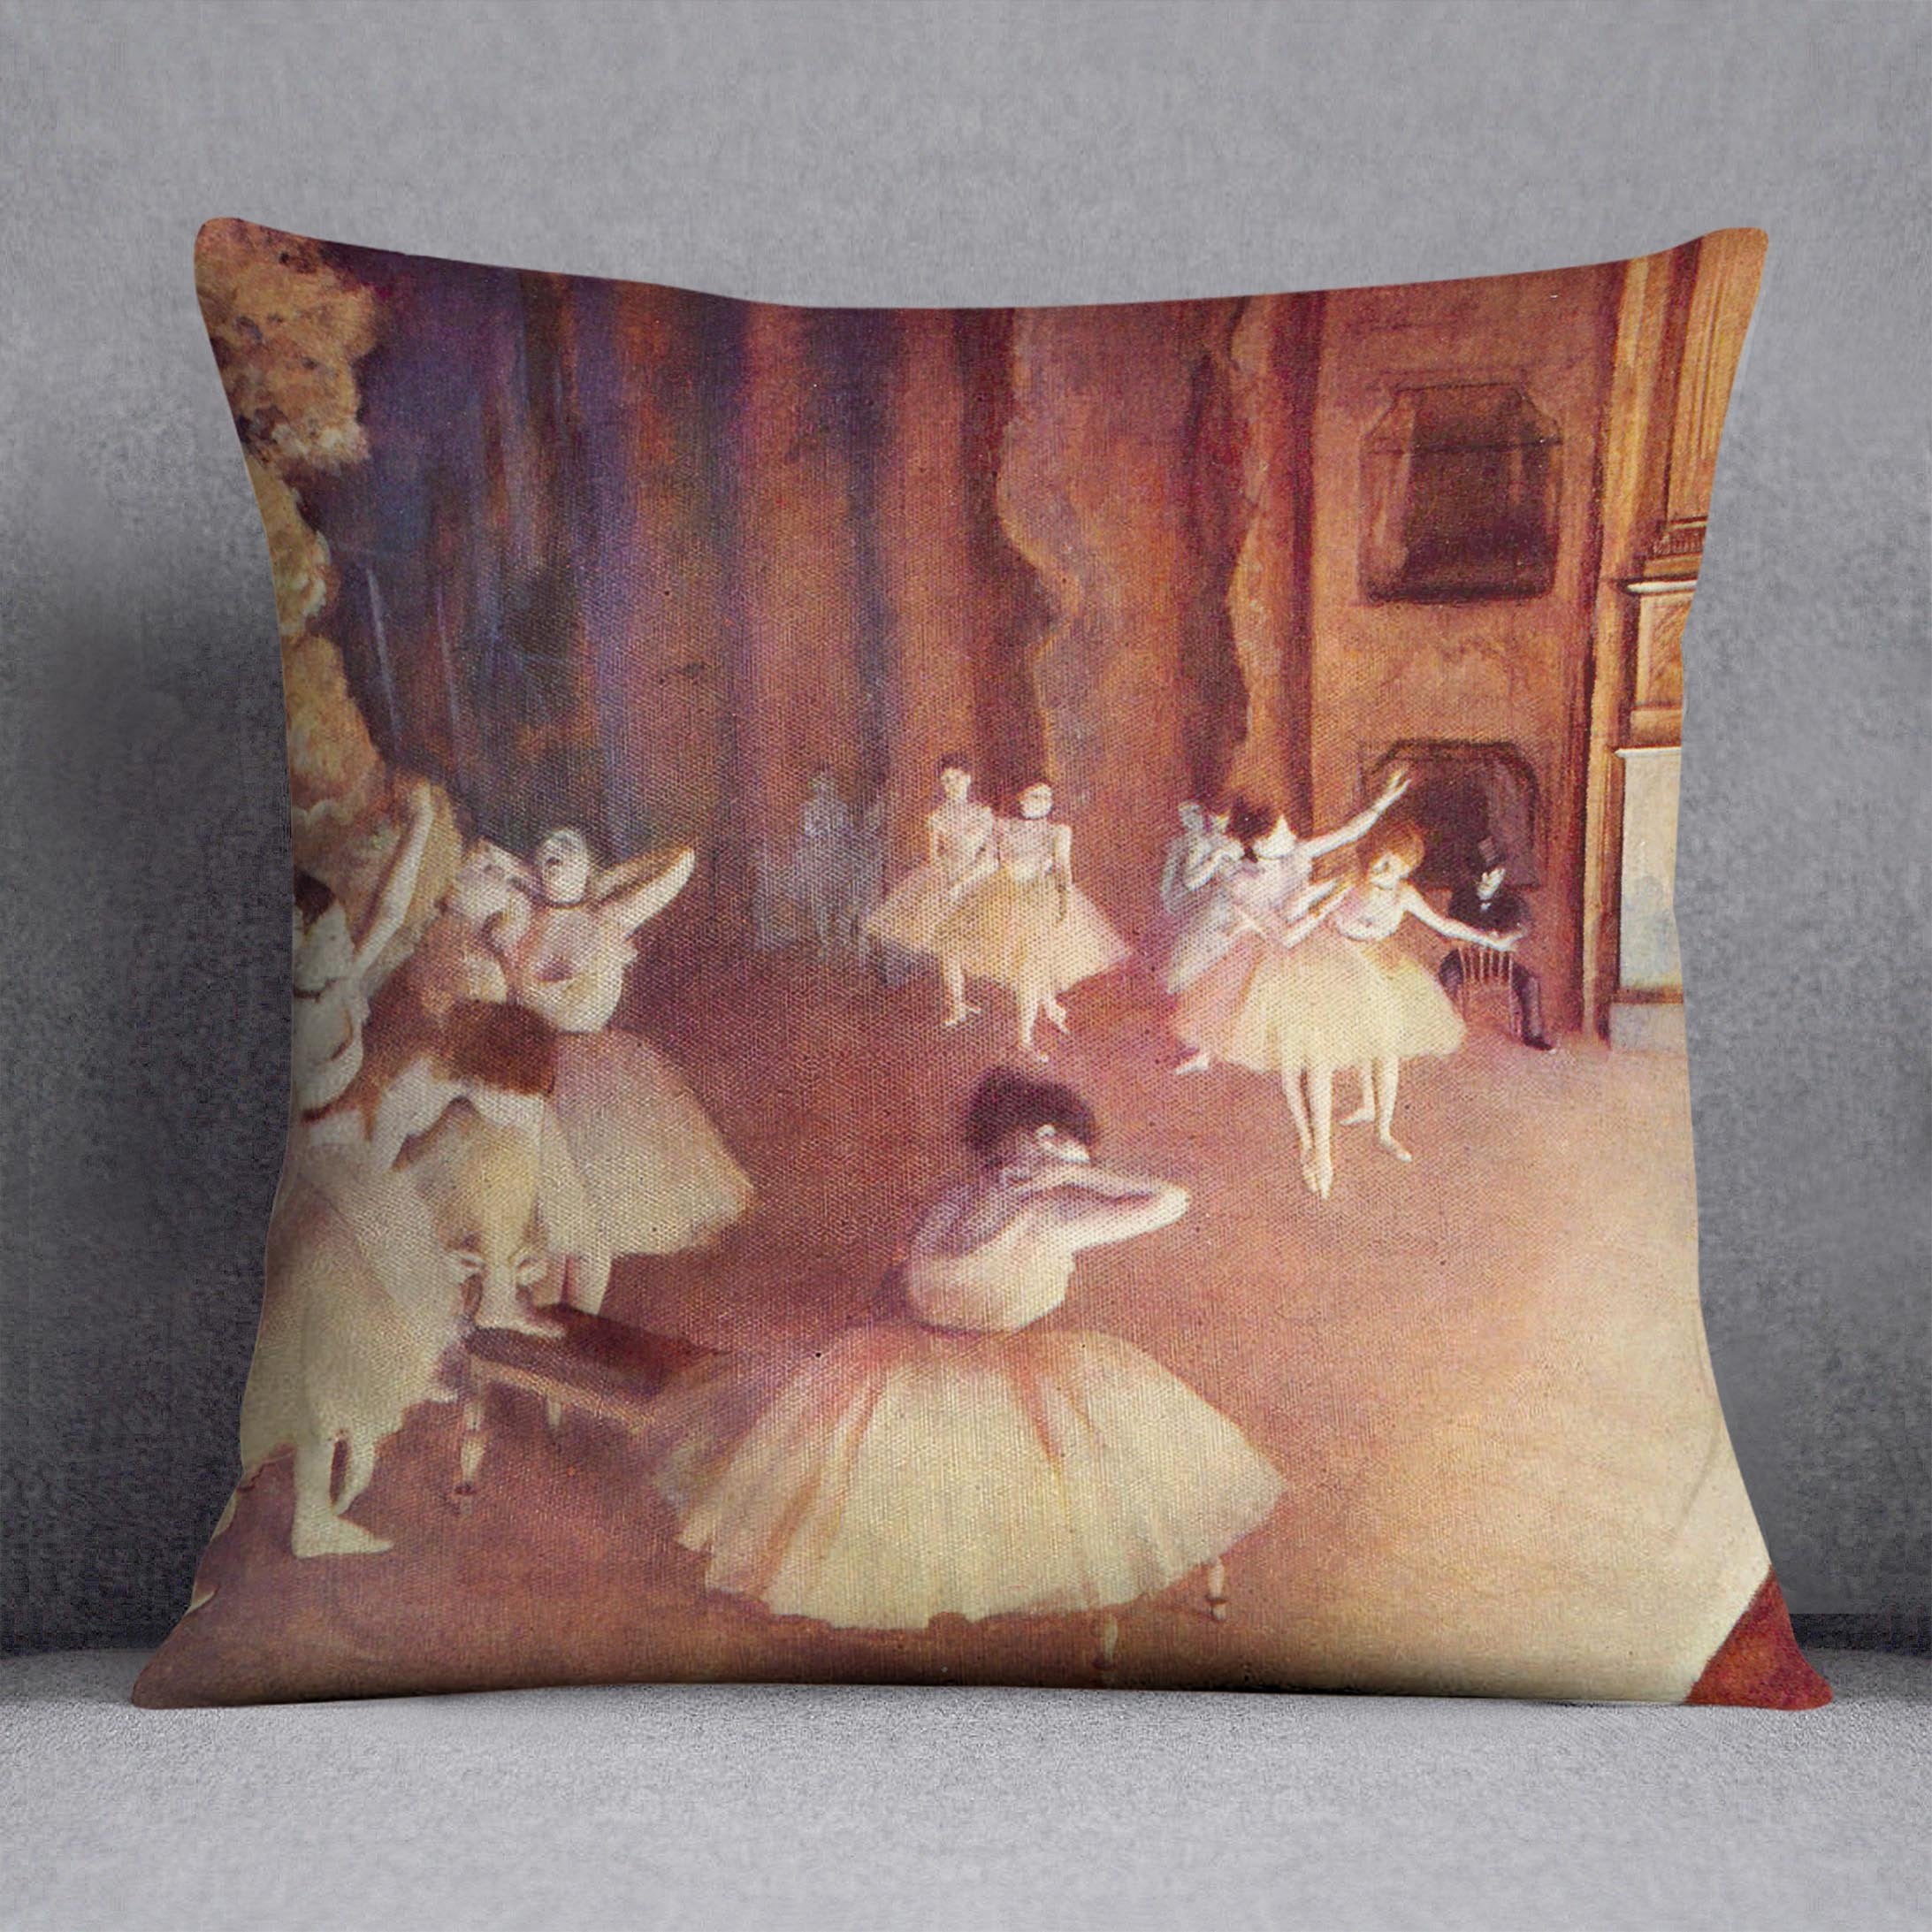 Dress rehearsal of the ballet on the stage by Degas Cushion